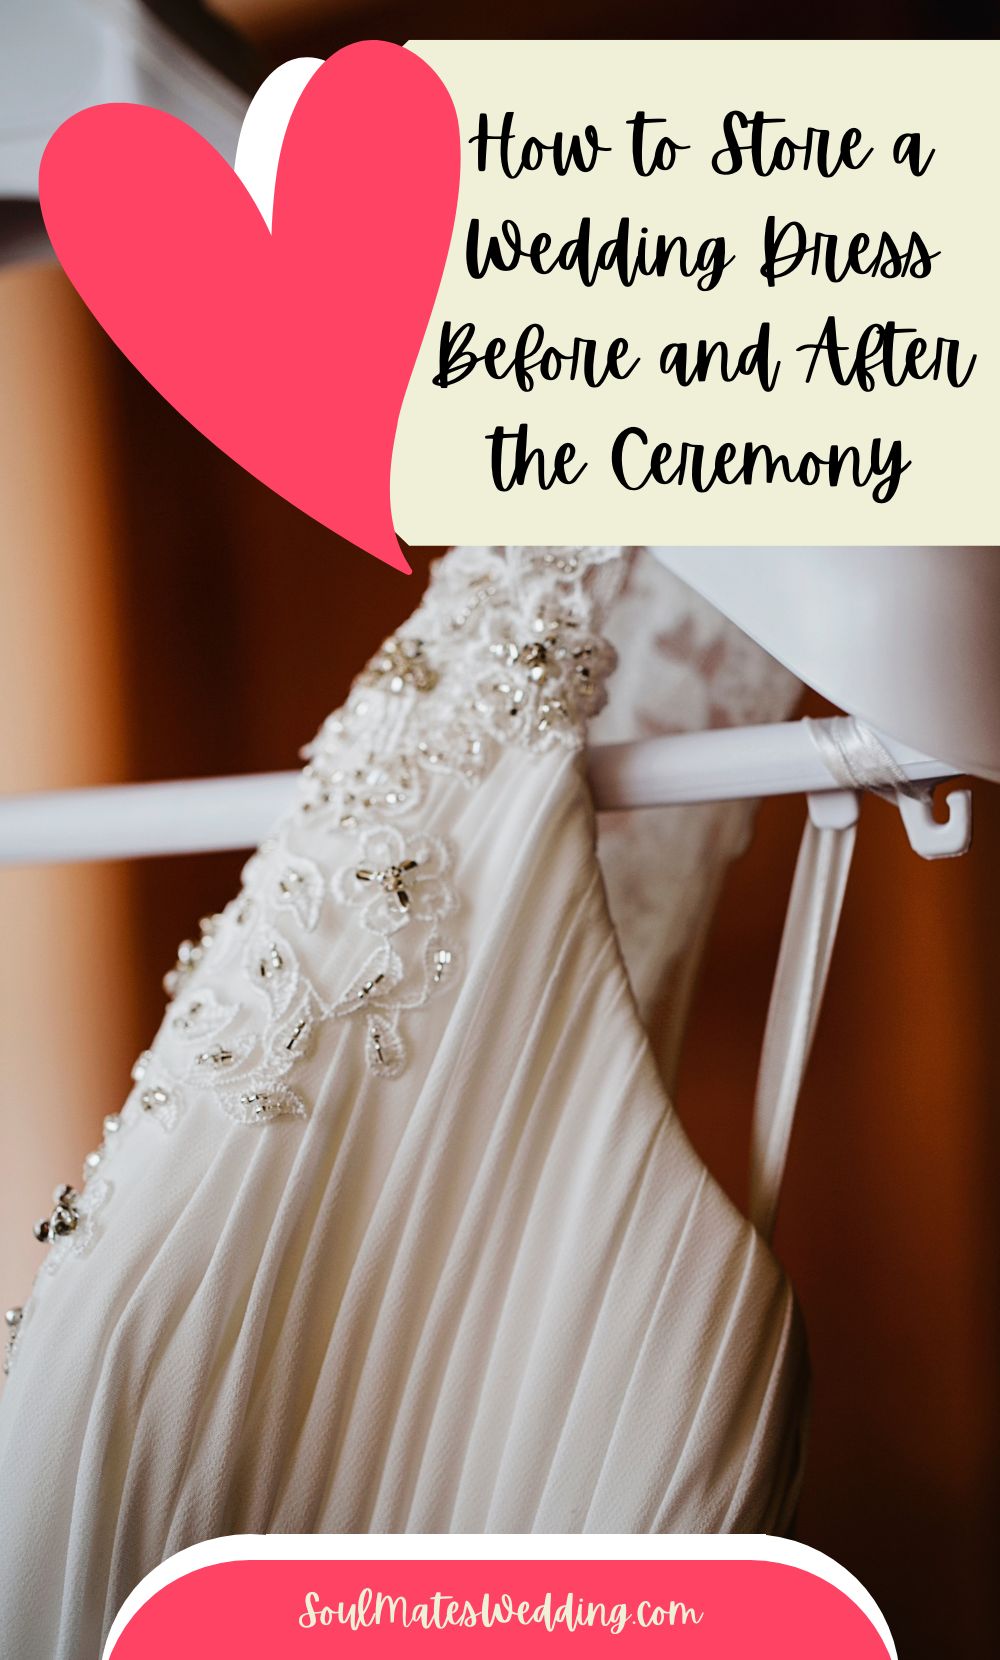 Storing Your Wedding Dress Before that Special Day